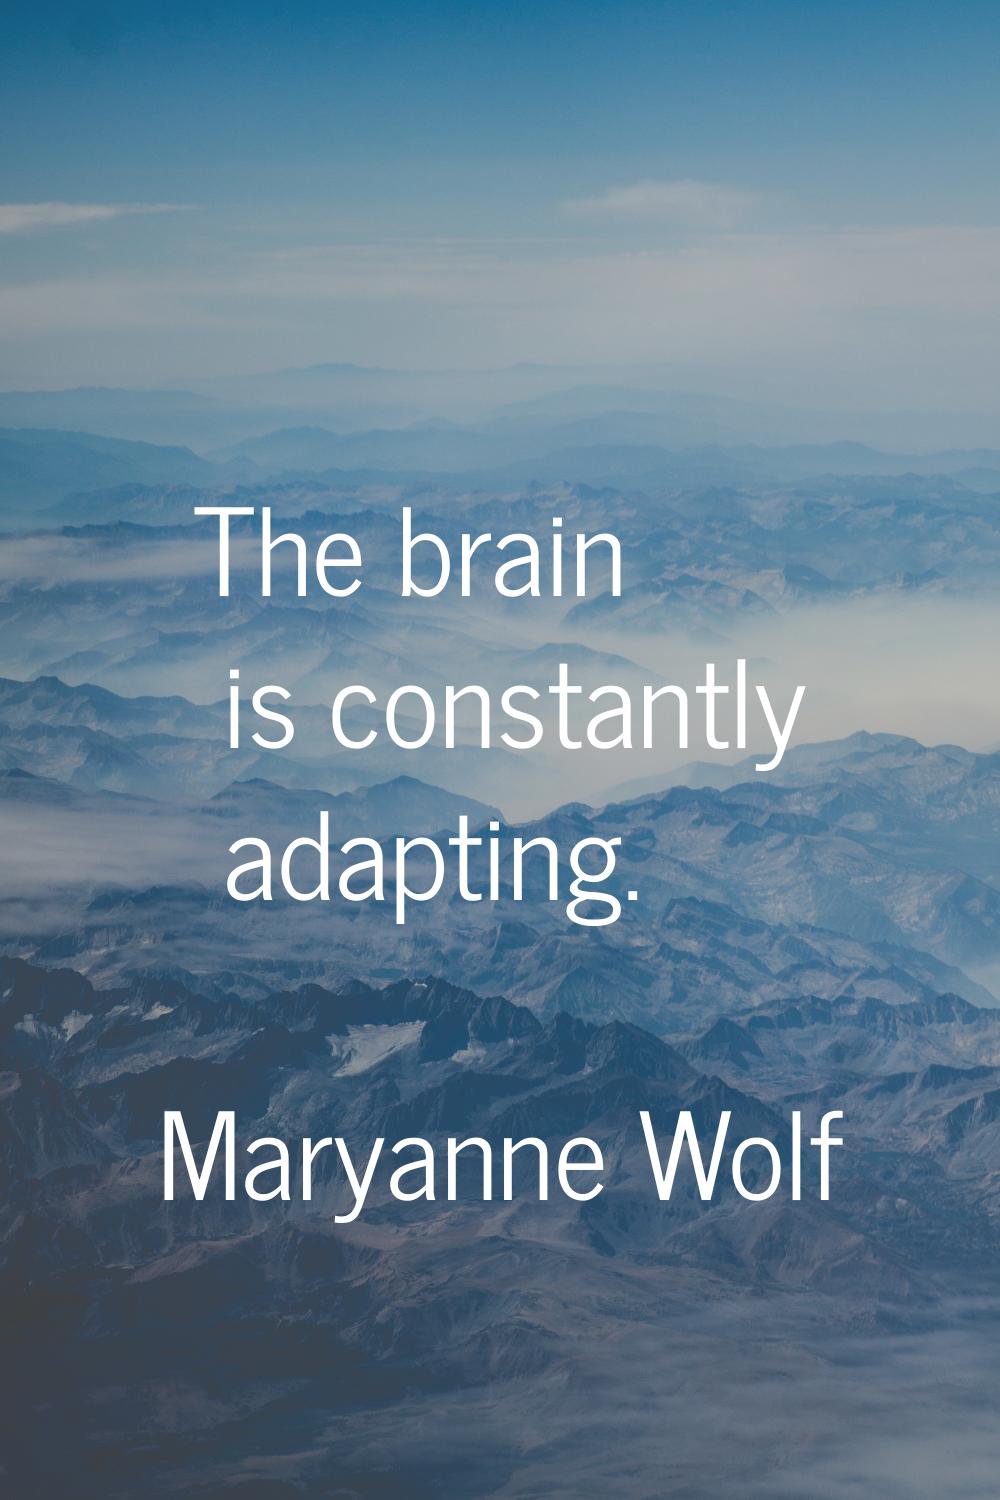 The brain is constantly adapting.